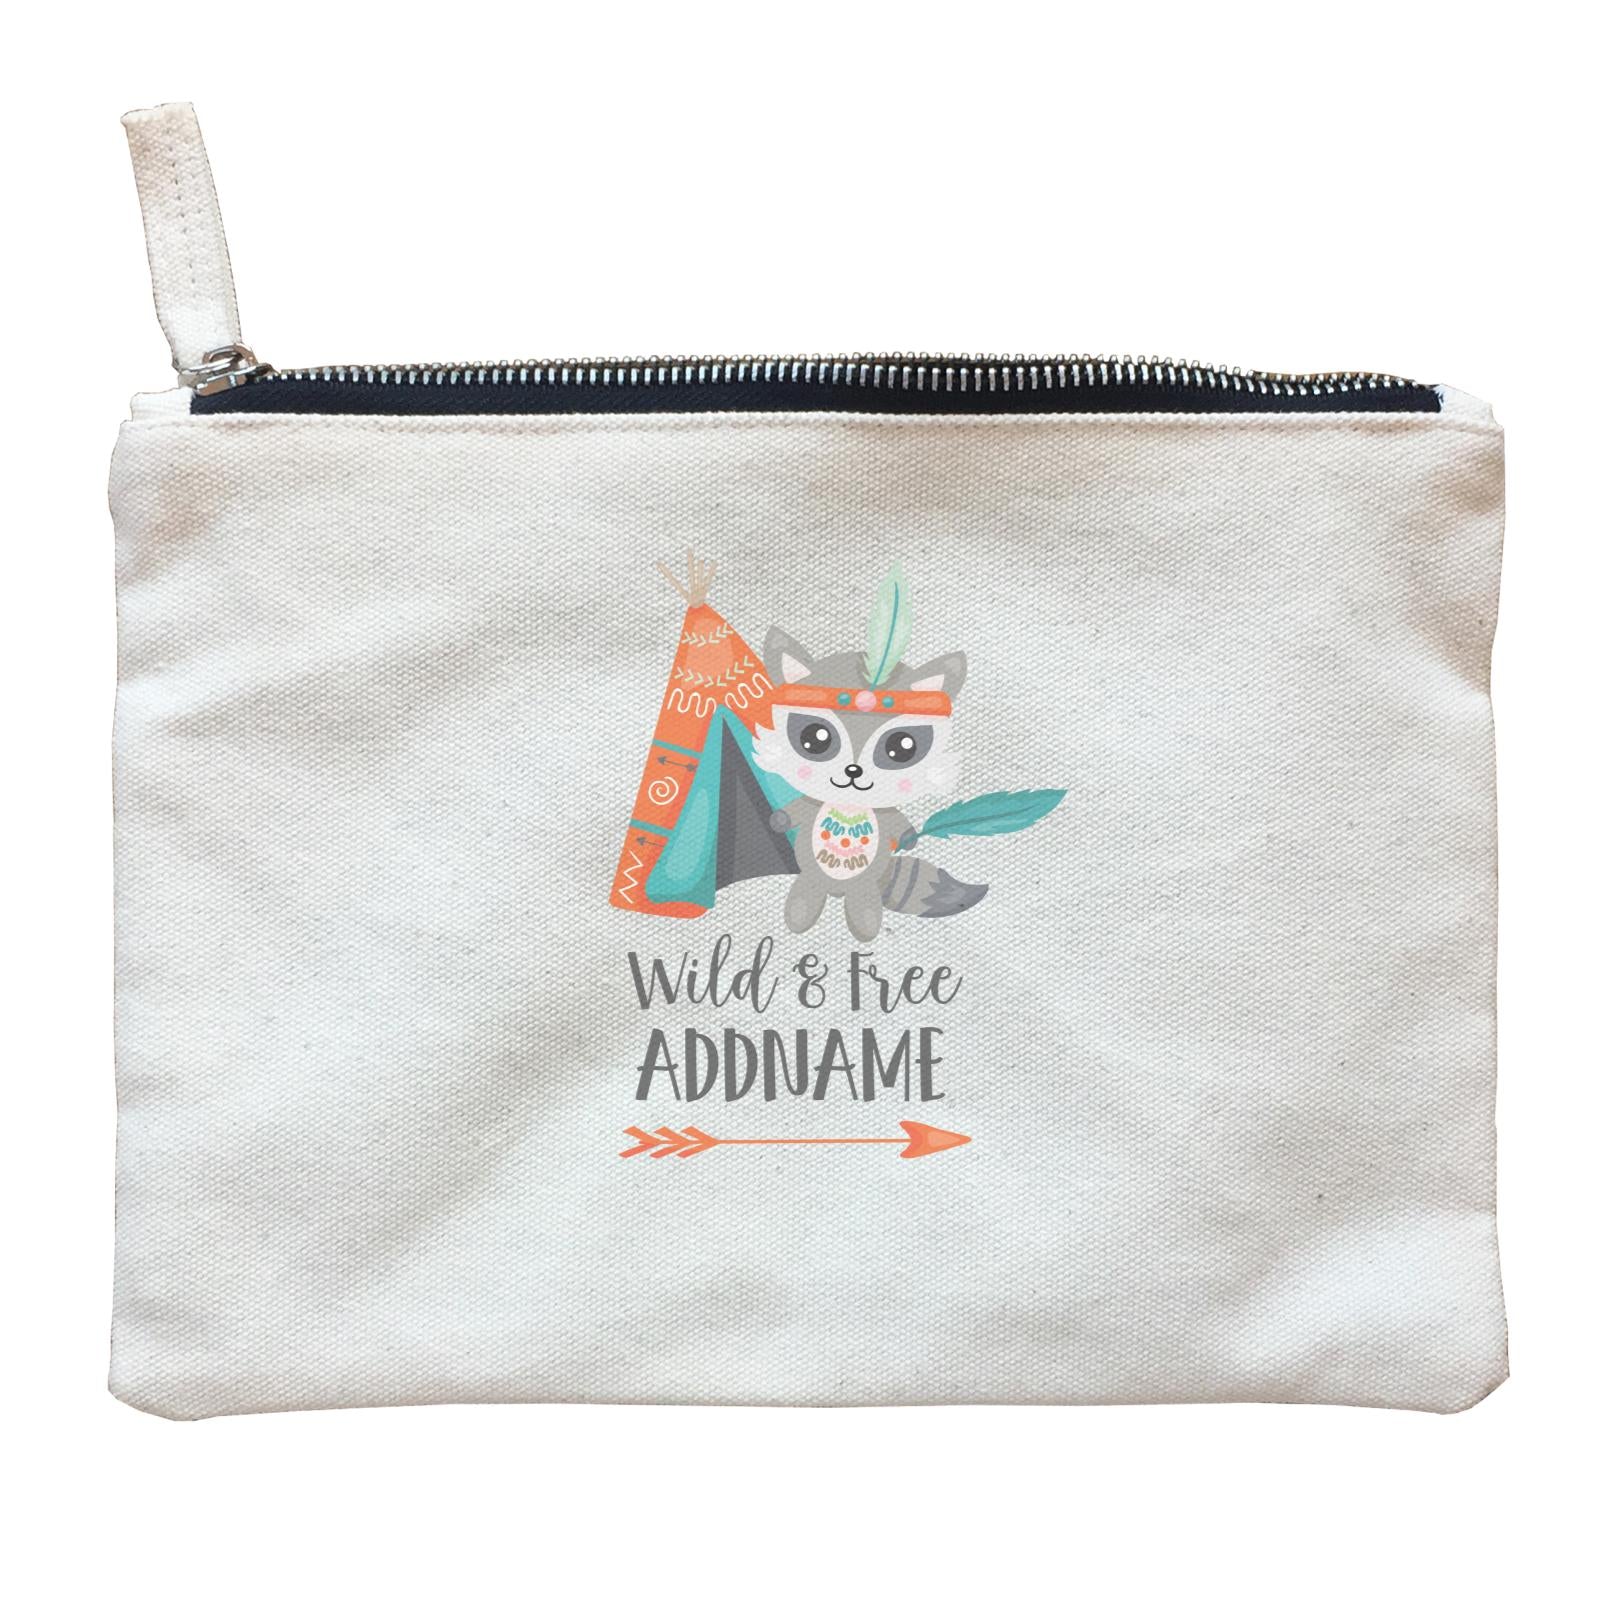 Cute Tribe Animals Raccoon Wild & Free Addname Zipper Pouch